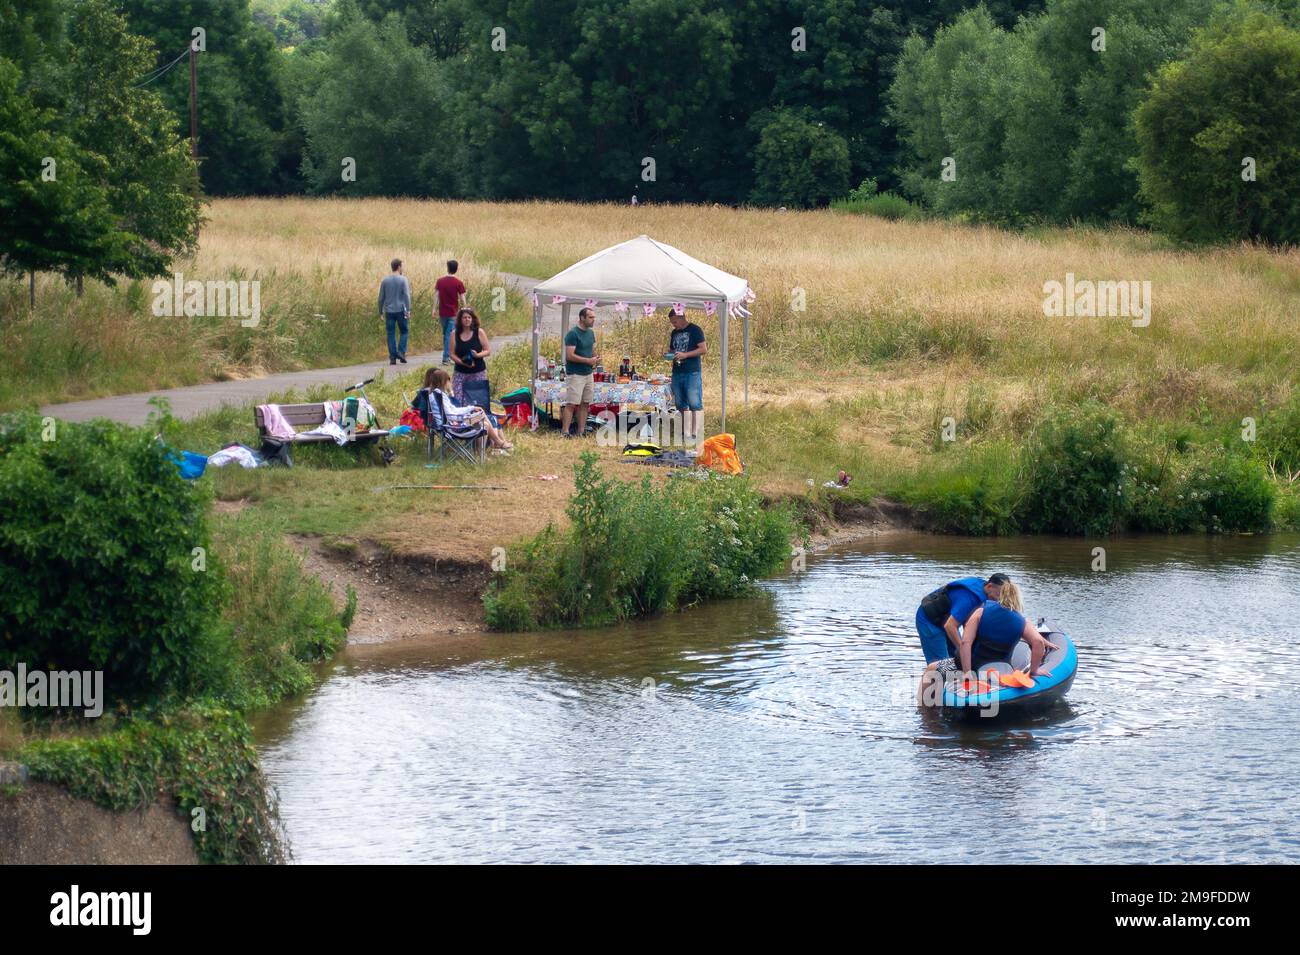 Cookham, Berkshire, UK. 26th June, 2022. People enjoying a picnic by the River Thames in Cookham. Credit: Maureen McLean/Alamy Stock Photo